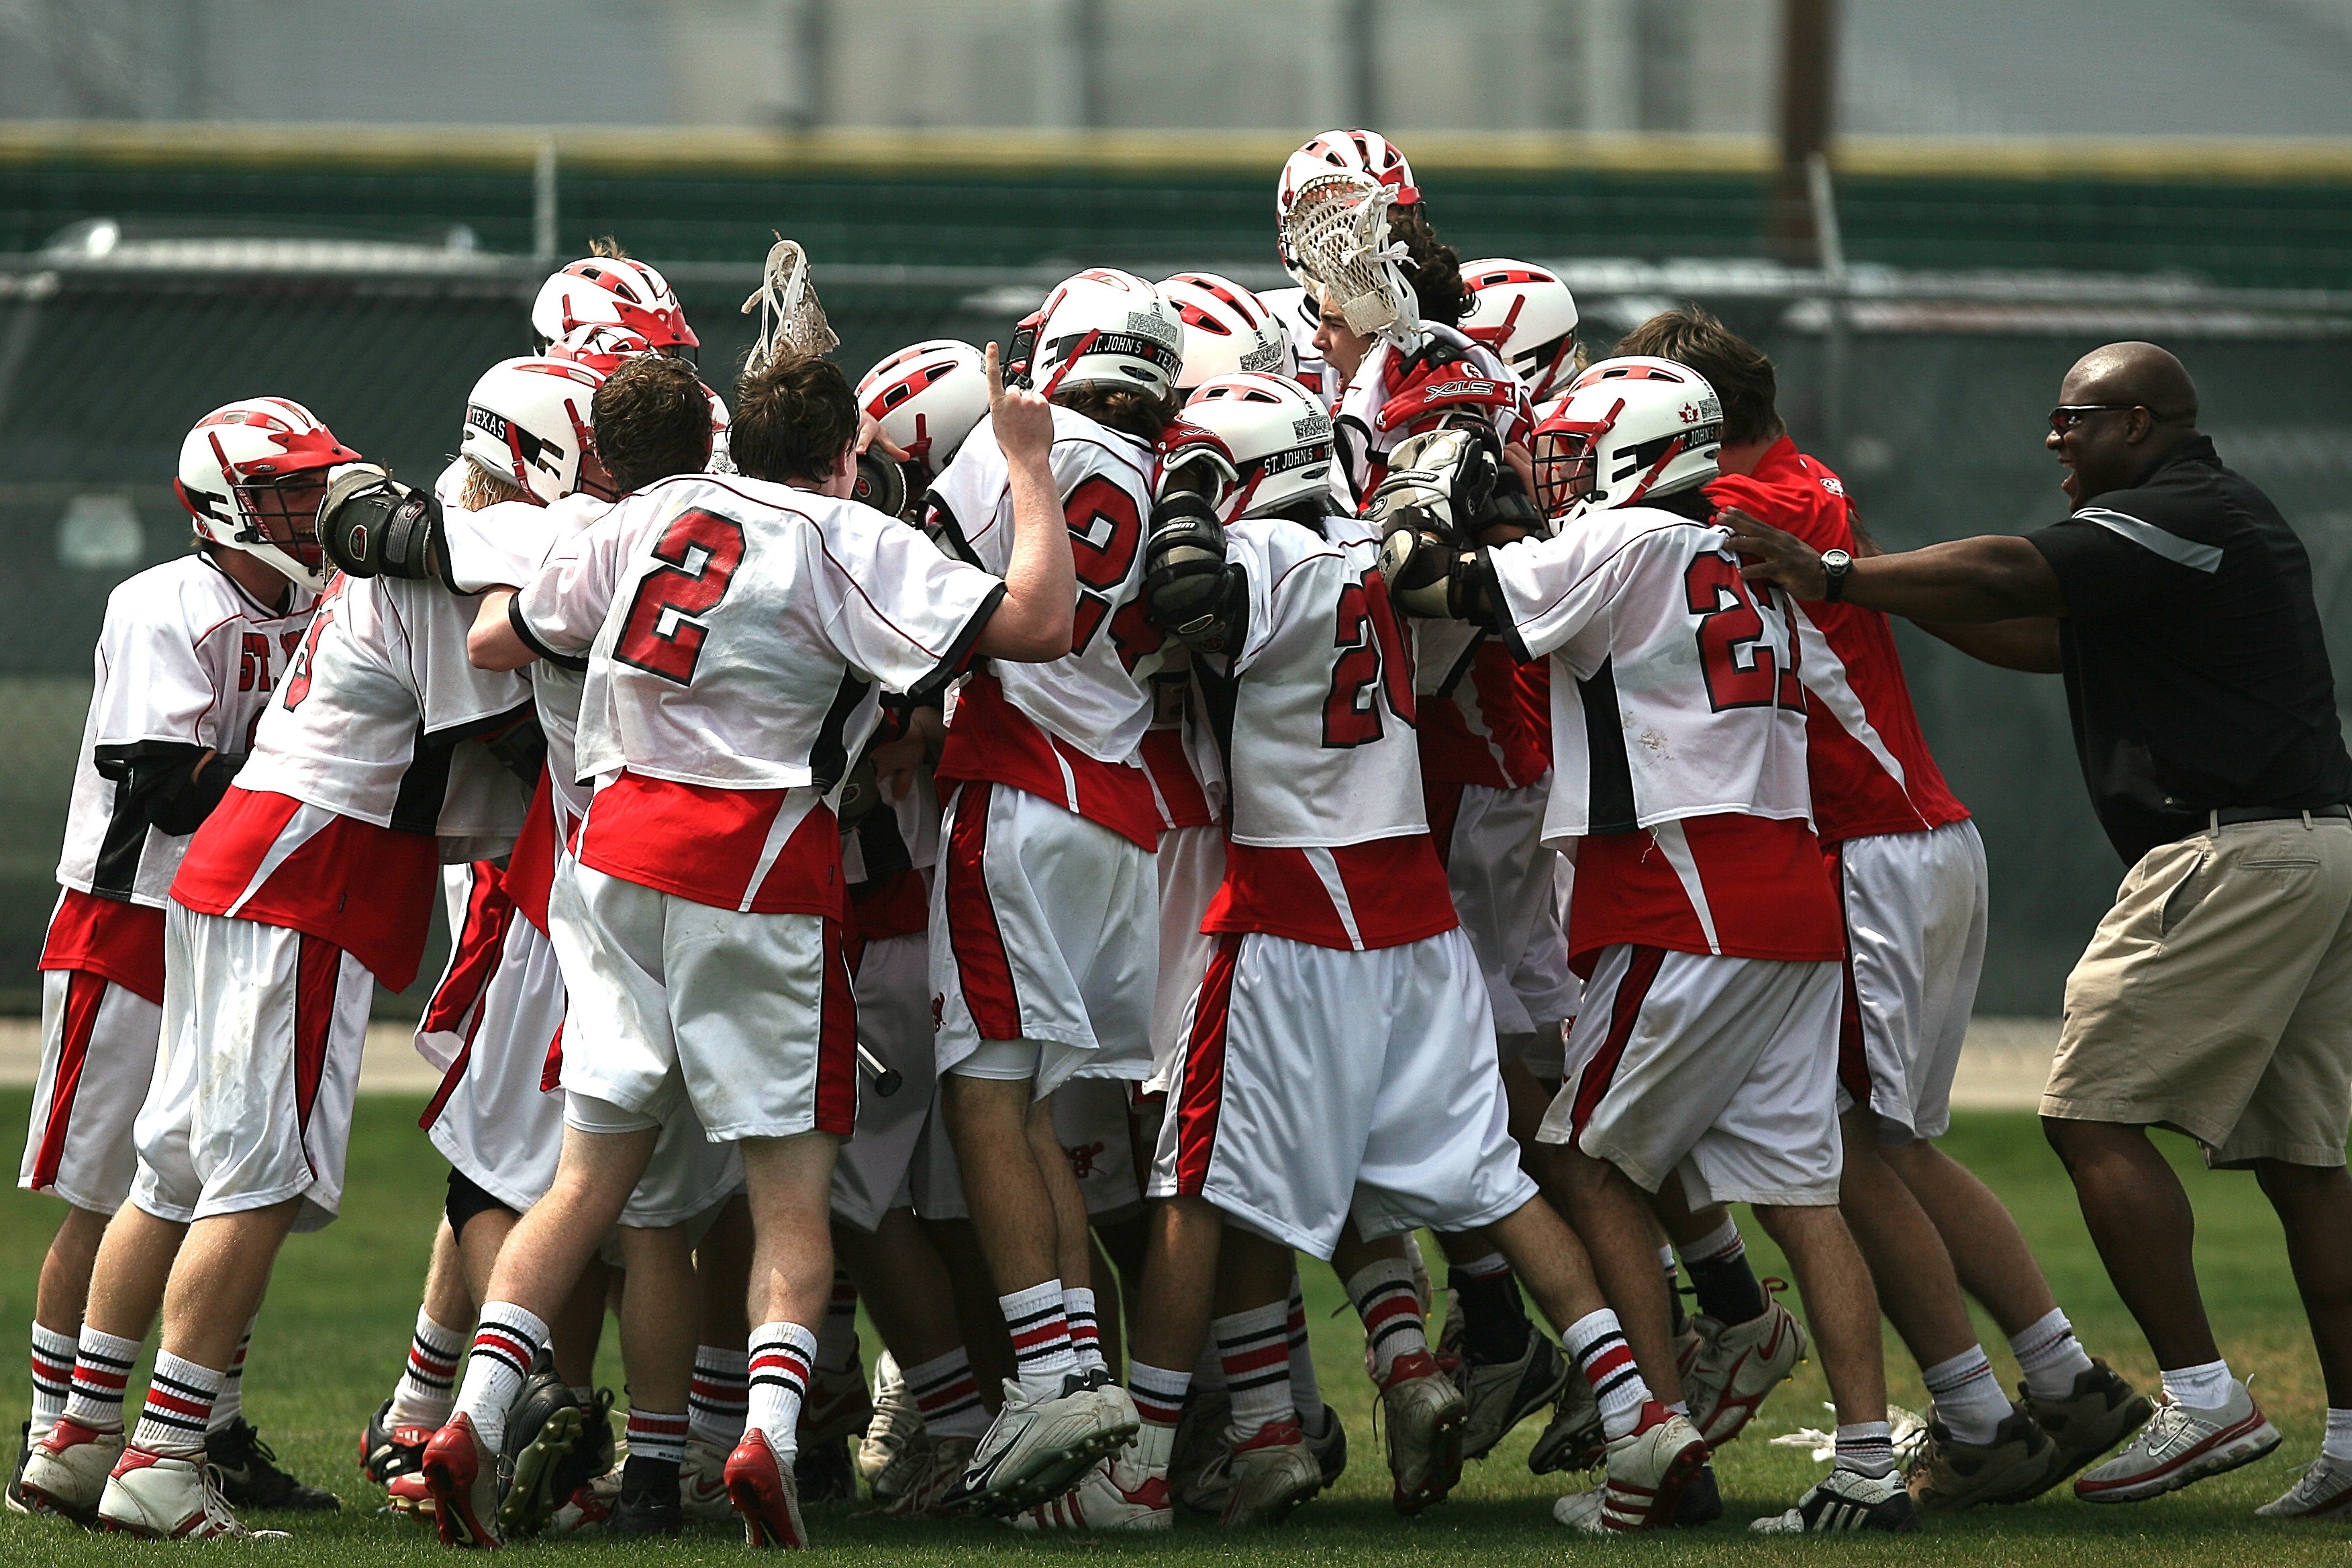 Group of lacrosse players celebrating with coach during daytime photo